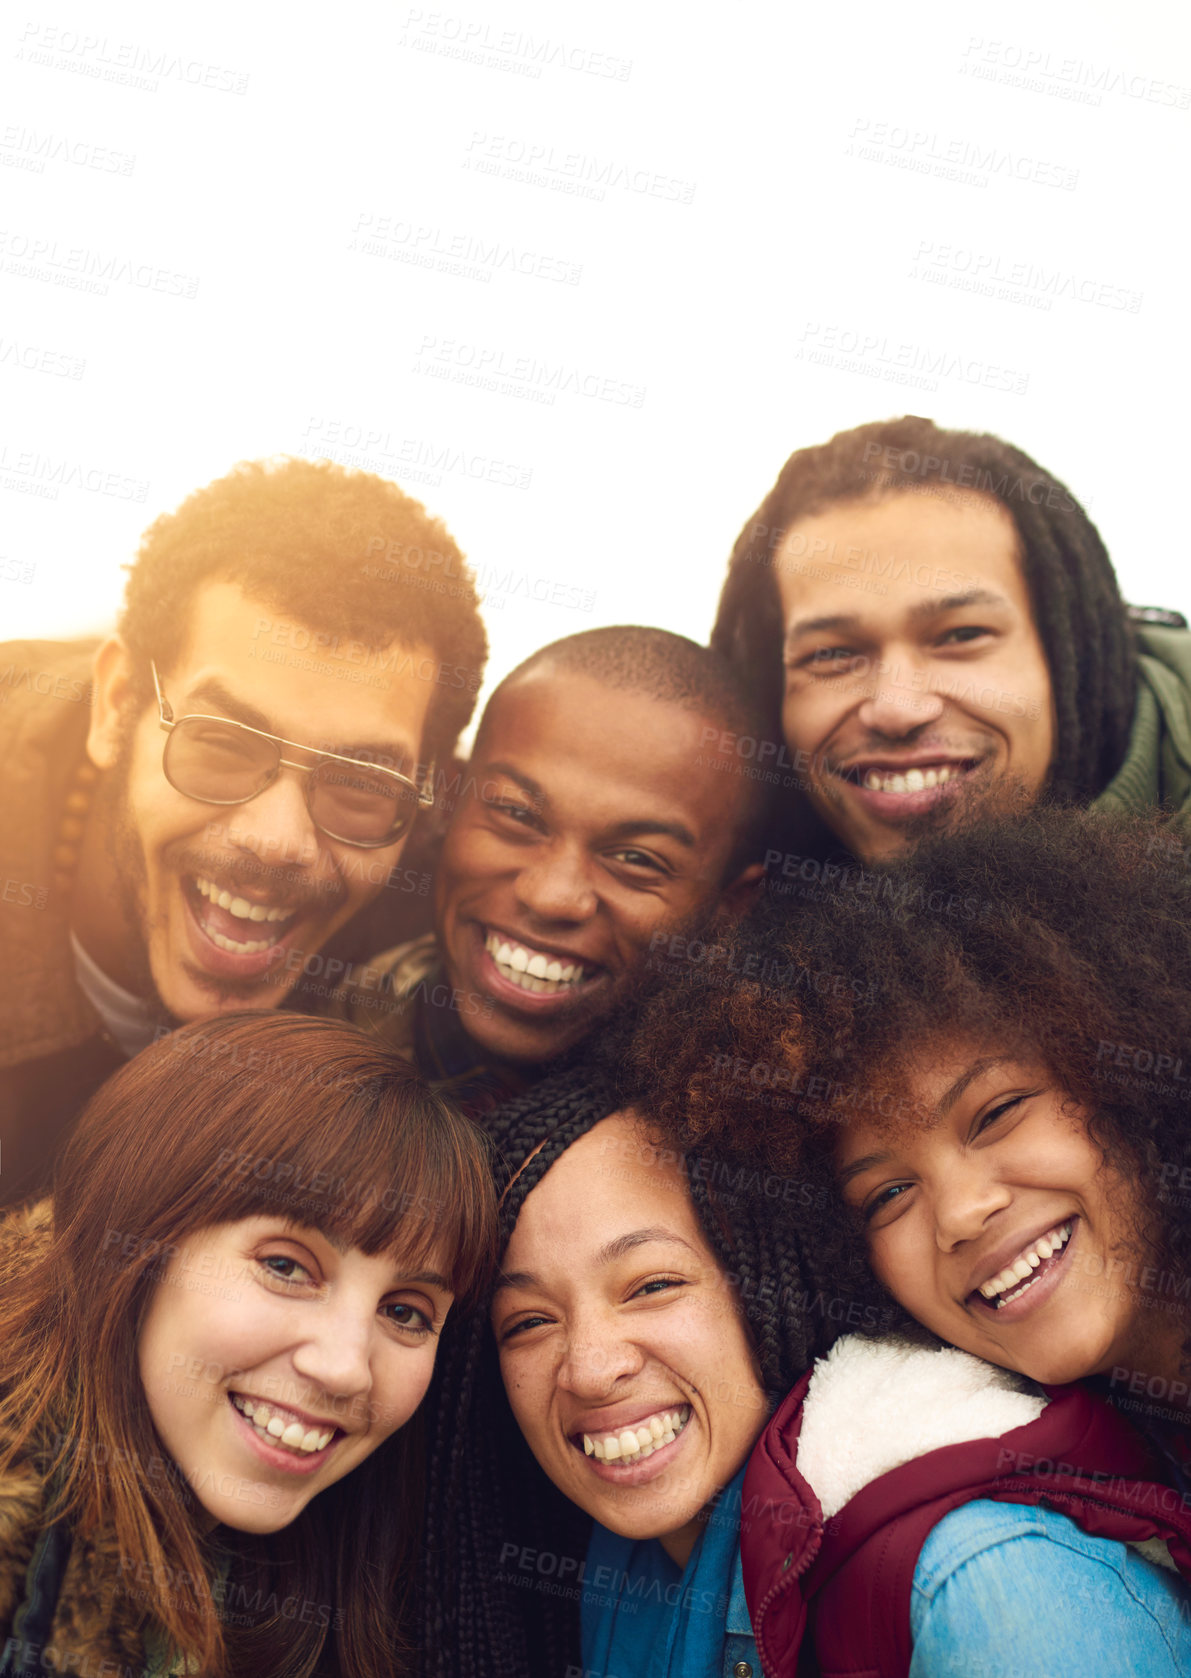 Buy stock photo Portrait of a happy group of friends posing together outside